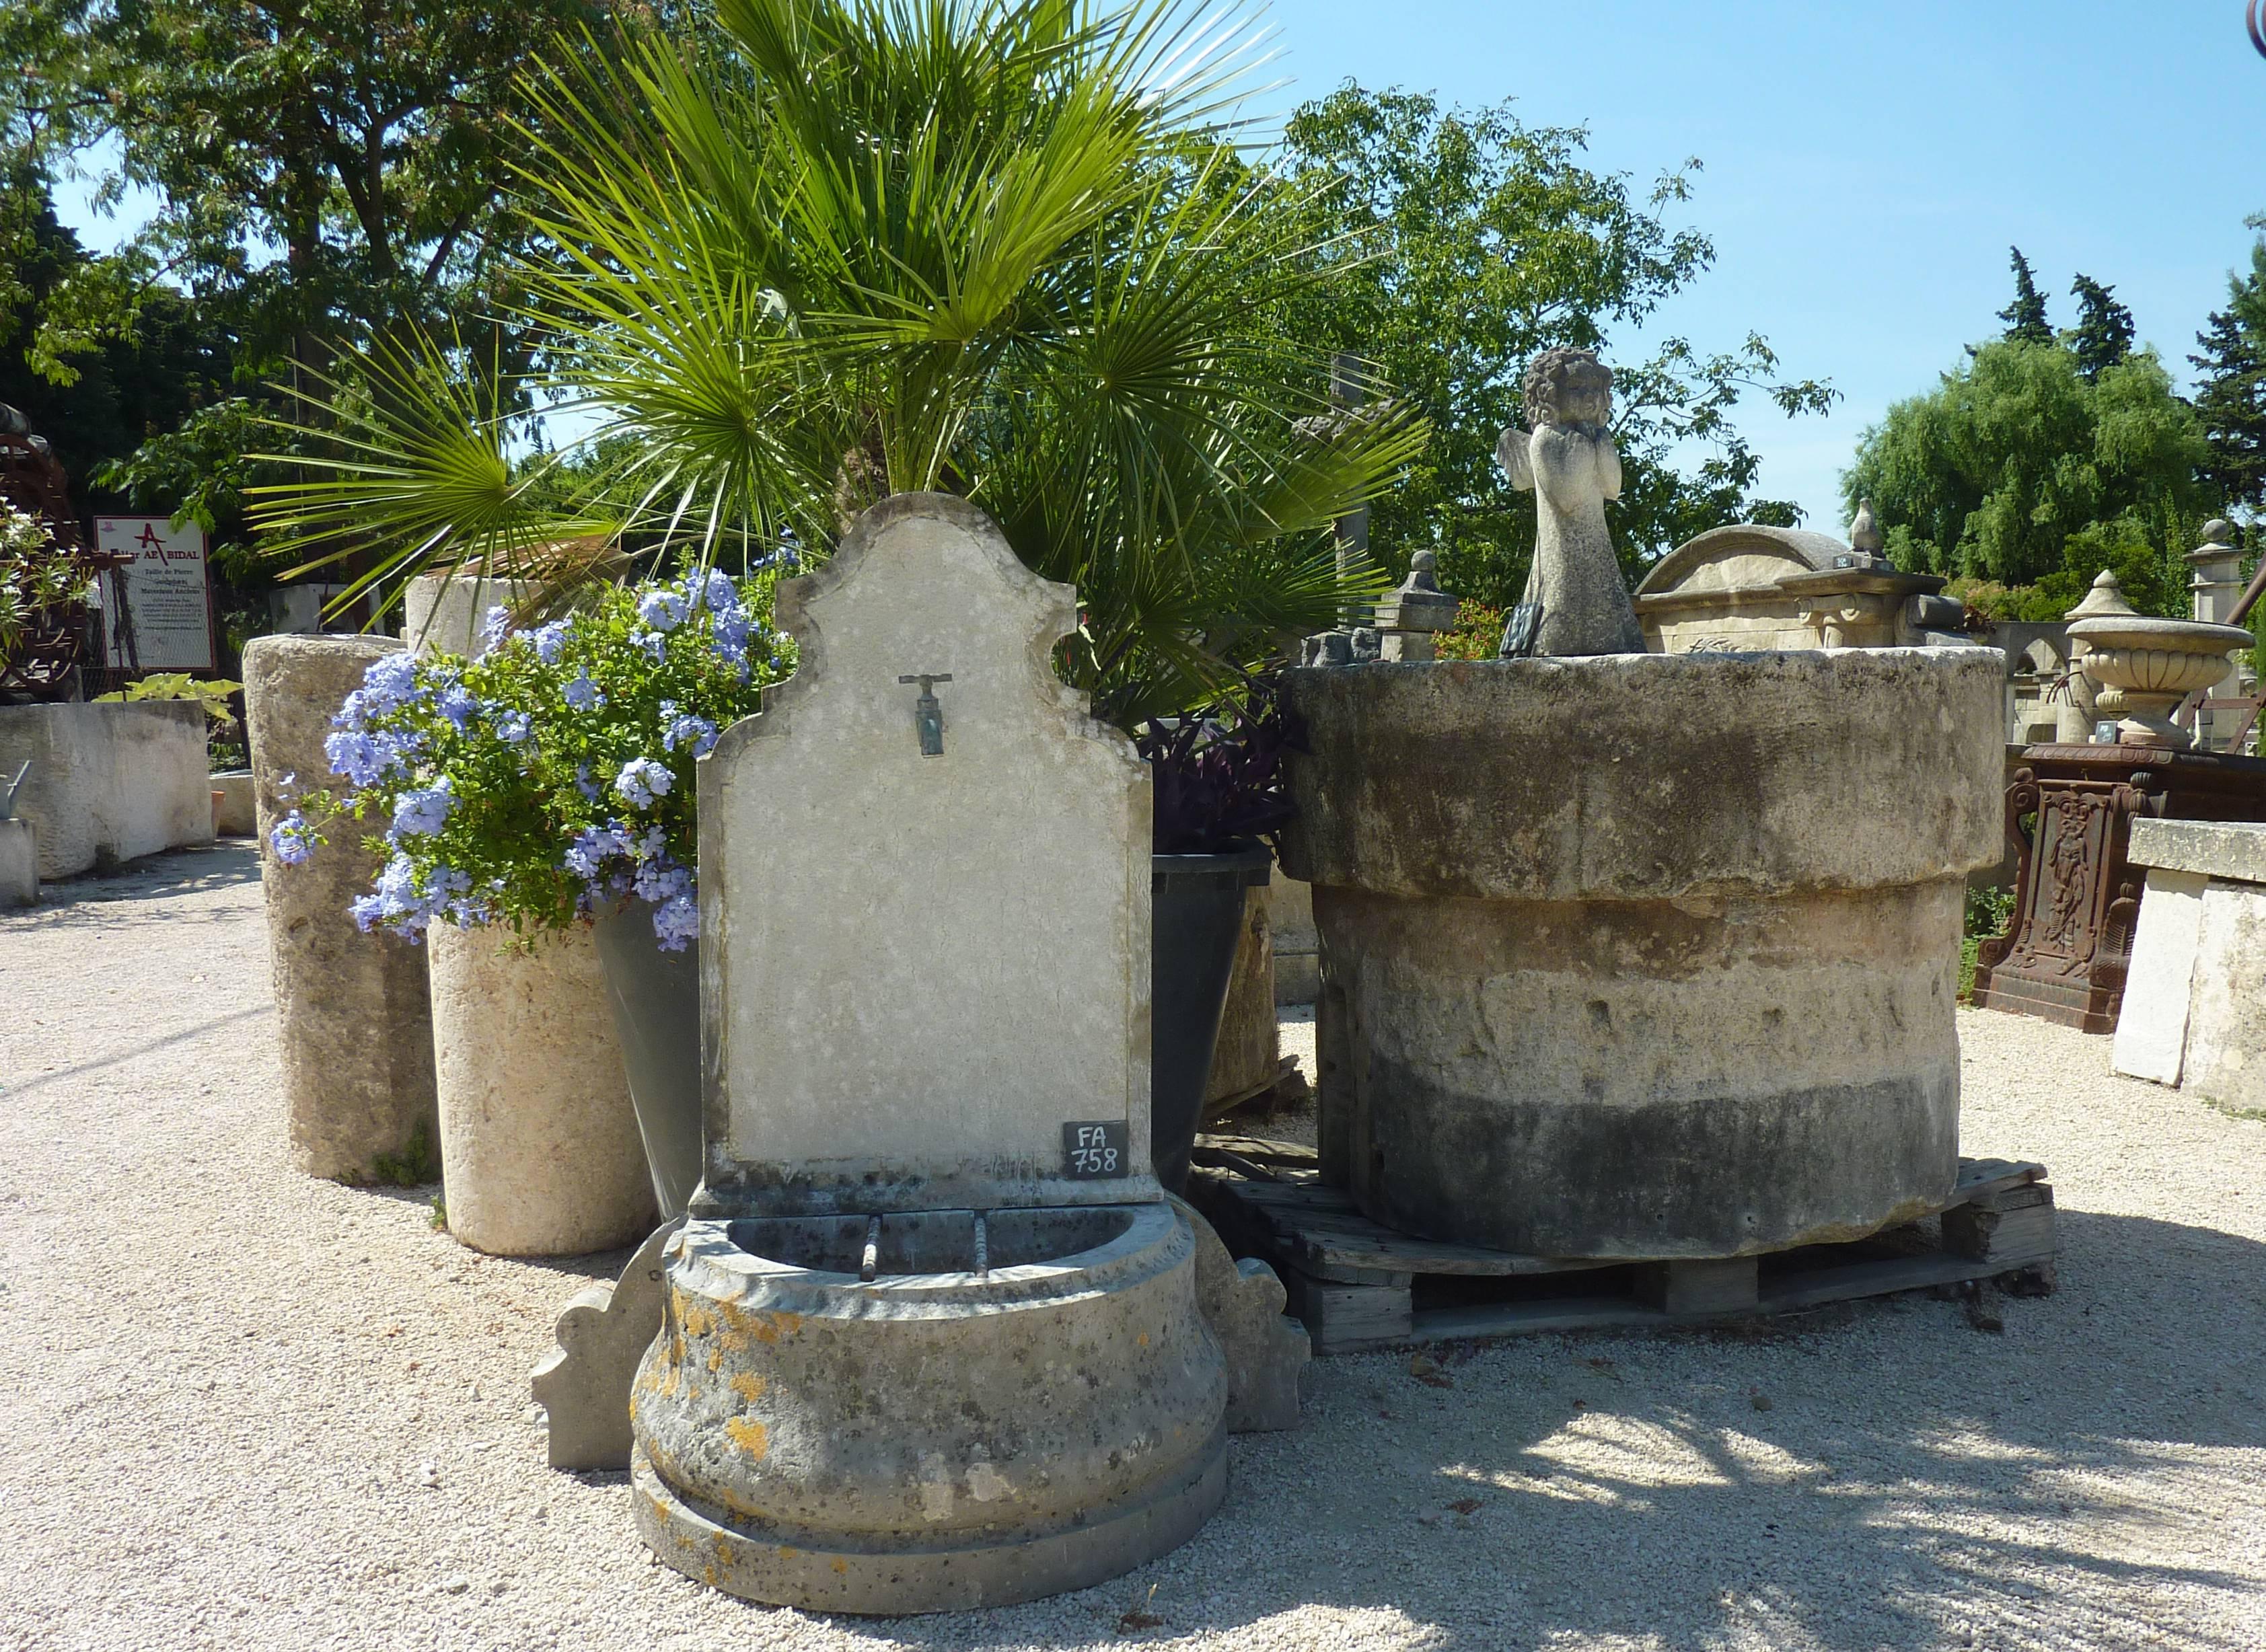 Lovely small garden fountain made of reclaimed materials.

This drinking fountain is composed of a sculpted half-round shaped monolithic basin looking like a trough with two metal rest-bucket bars. The wall piece is also made of an antique